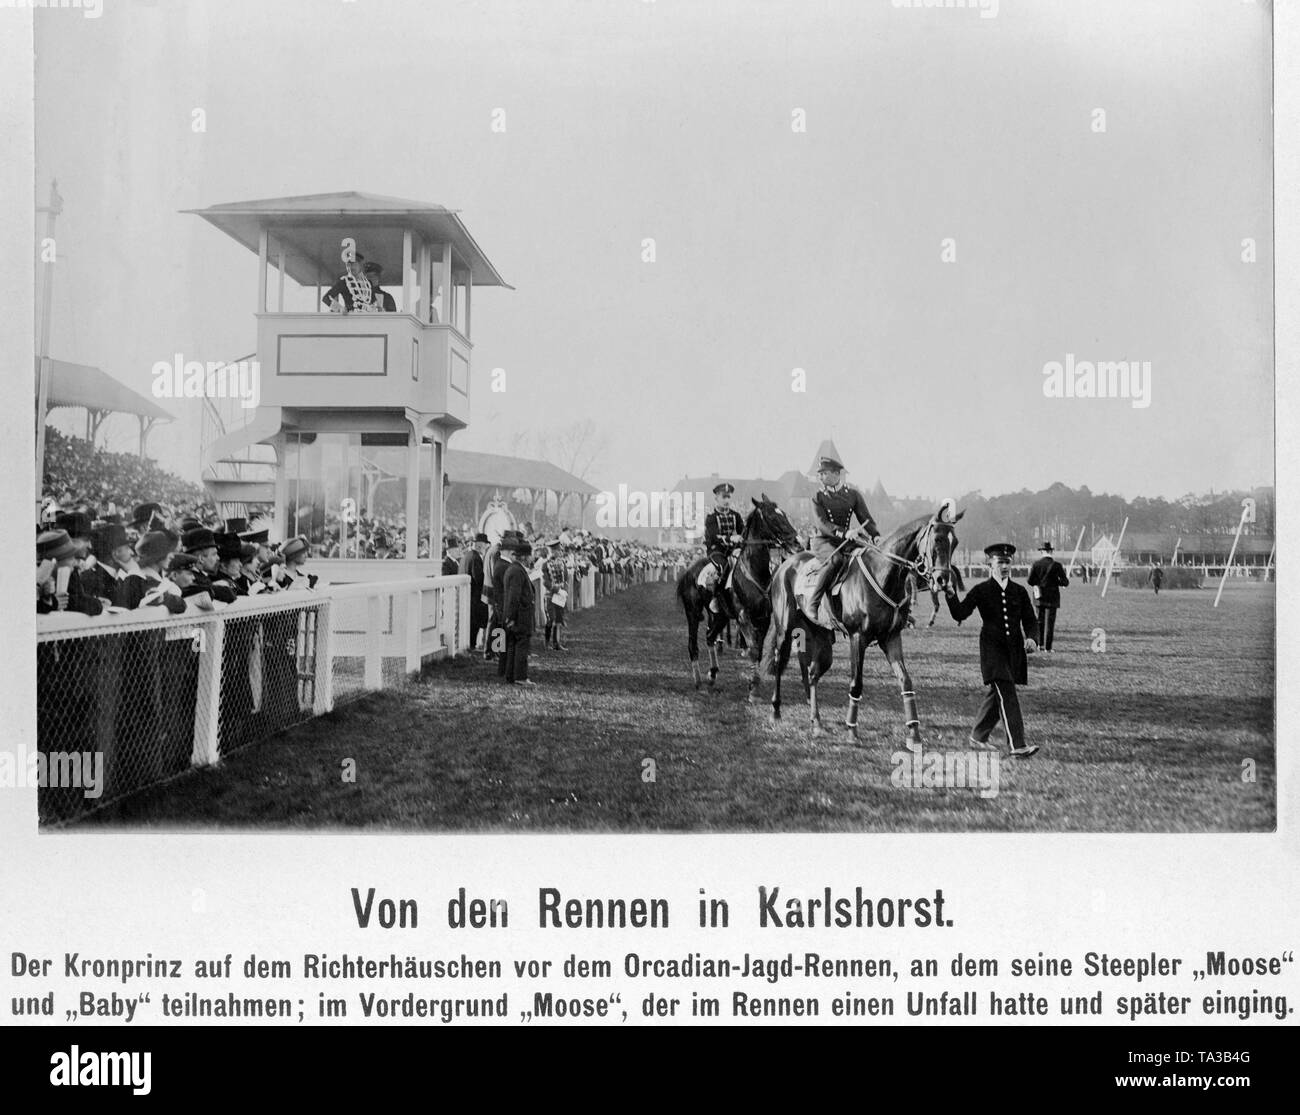 Crown Prince Wilhelm in the uniform of the Totenkopfhusaren (1st Leibhusaren Regiment No. 1 from Danzig) in a judge's box before the race. It was an Orcadian hunting race (obstacle race), in which participated two horses of the Crown Prince, 'Moose' and 'Baby' . In front held by the reins is 'Moose', who suffered a serious accident in the race. Stock Photo